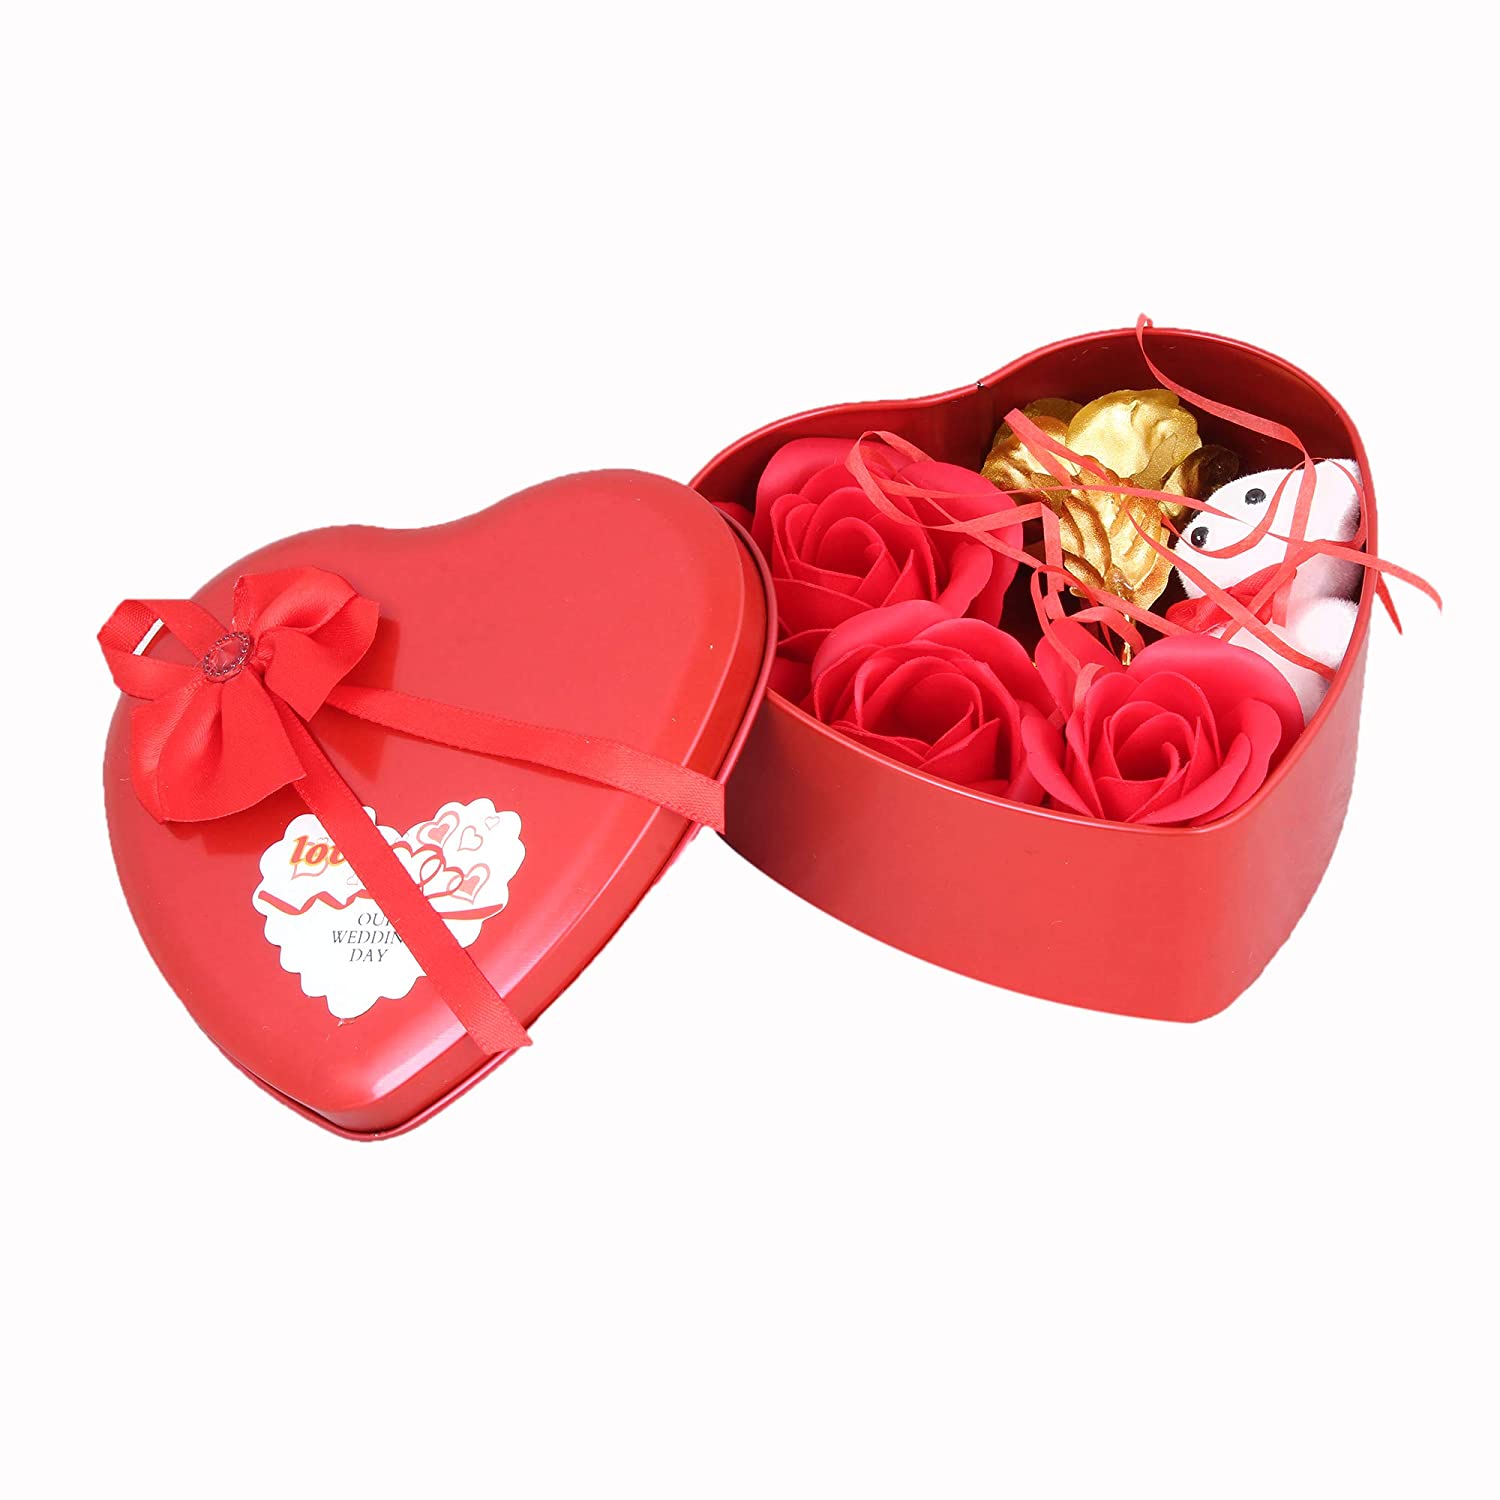 Best Romantic Gifts for Girls, Boys - Chocolate, Heart Shape Box with Small  Teddy, 1 Golden Rose and 3 Red Rose